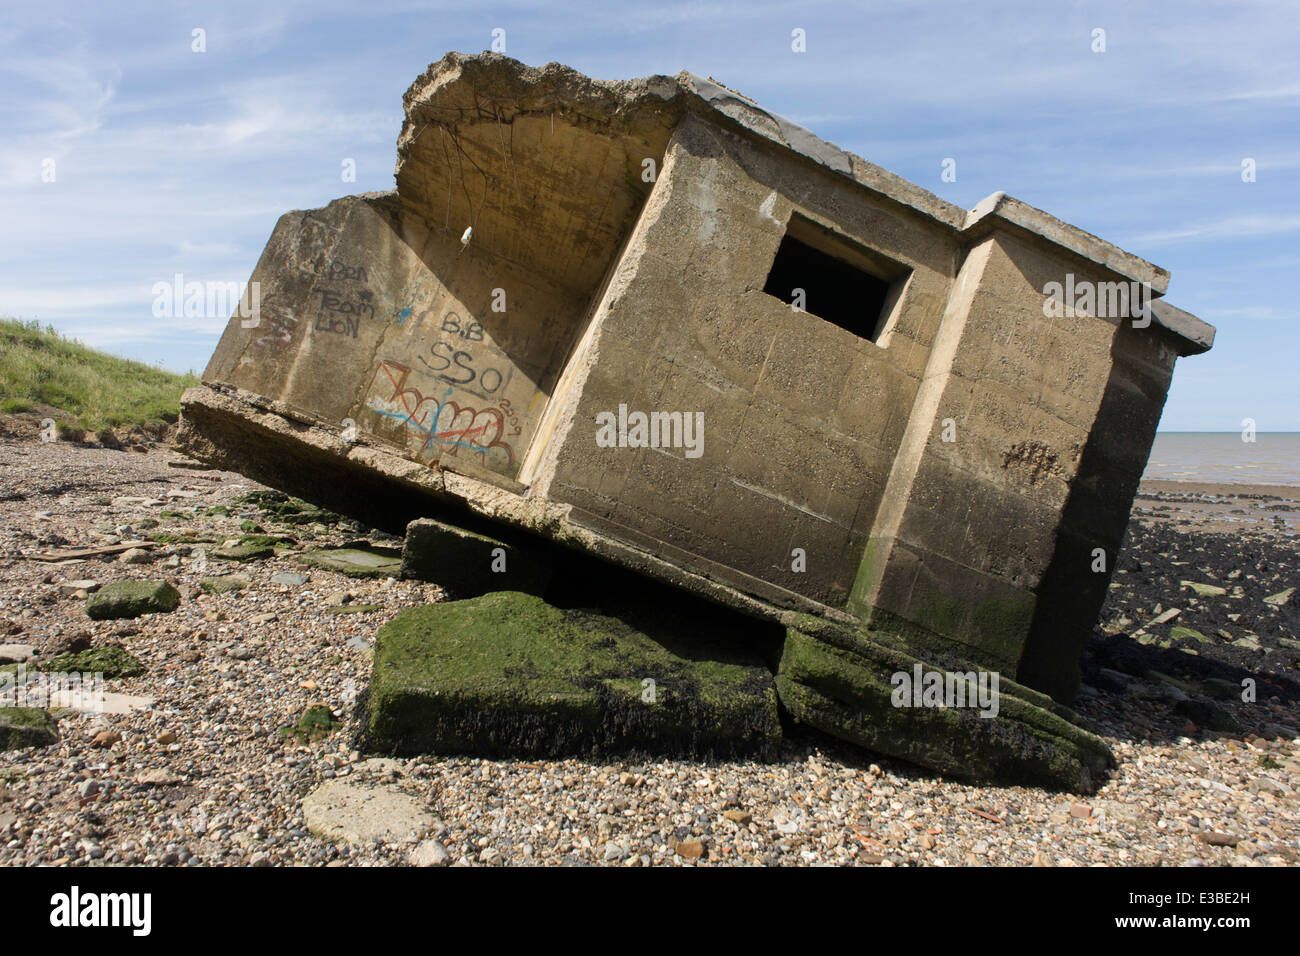 WW2-era concrete pillbox defence structure lies on the beach after coastal erosion at Warden Point, Isle of Sheppey, Kent. Stock Photo